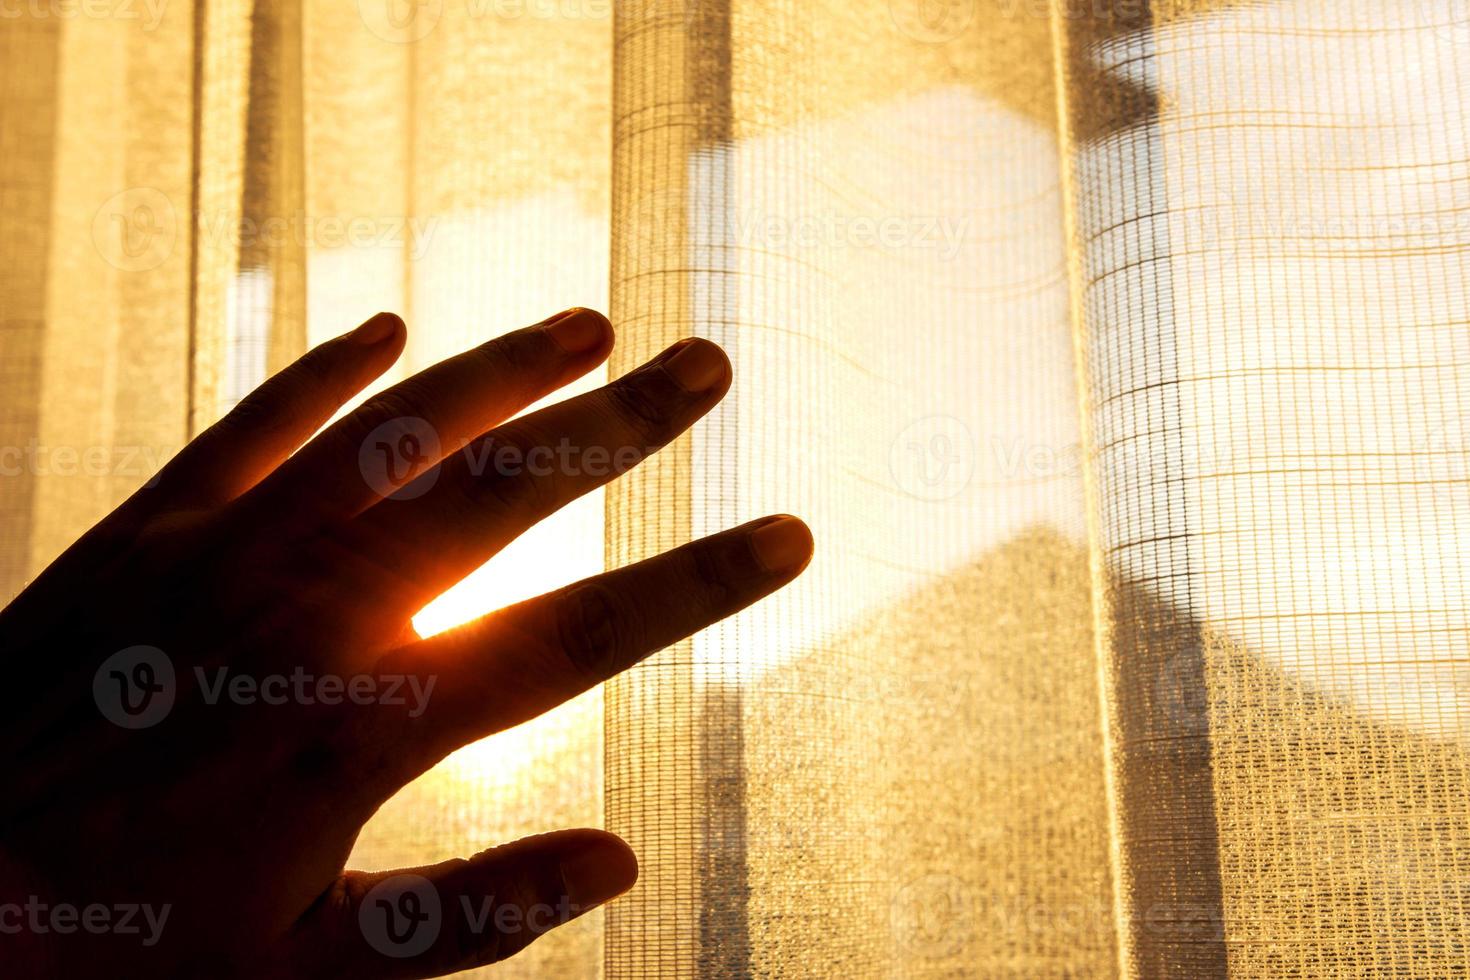 Skin or Eyes Protection Concept. Hand Raised Up to Protect a Summer Sunlight inside a House. Curtain See Through and Sunburst as background photo